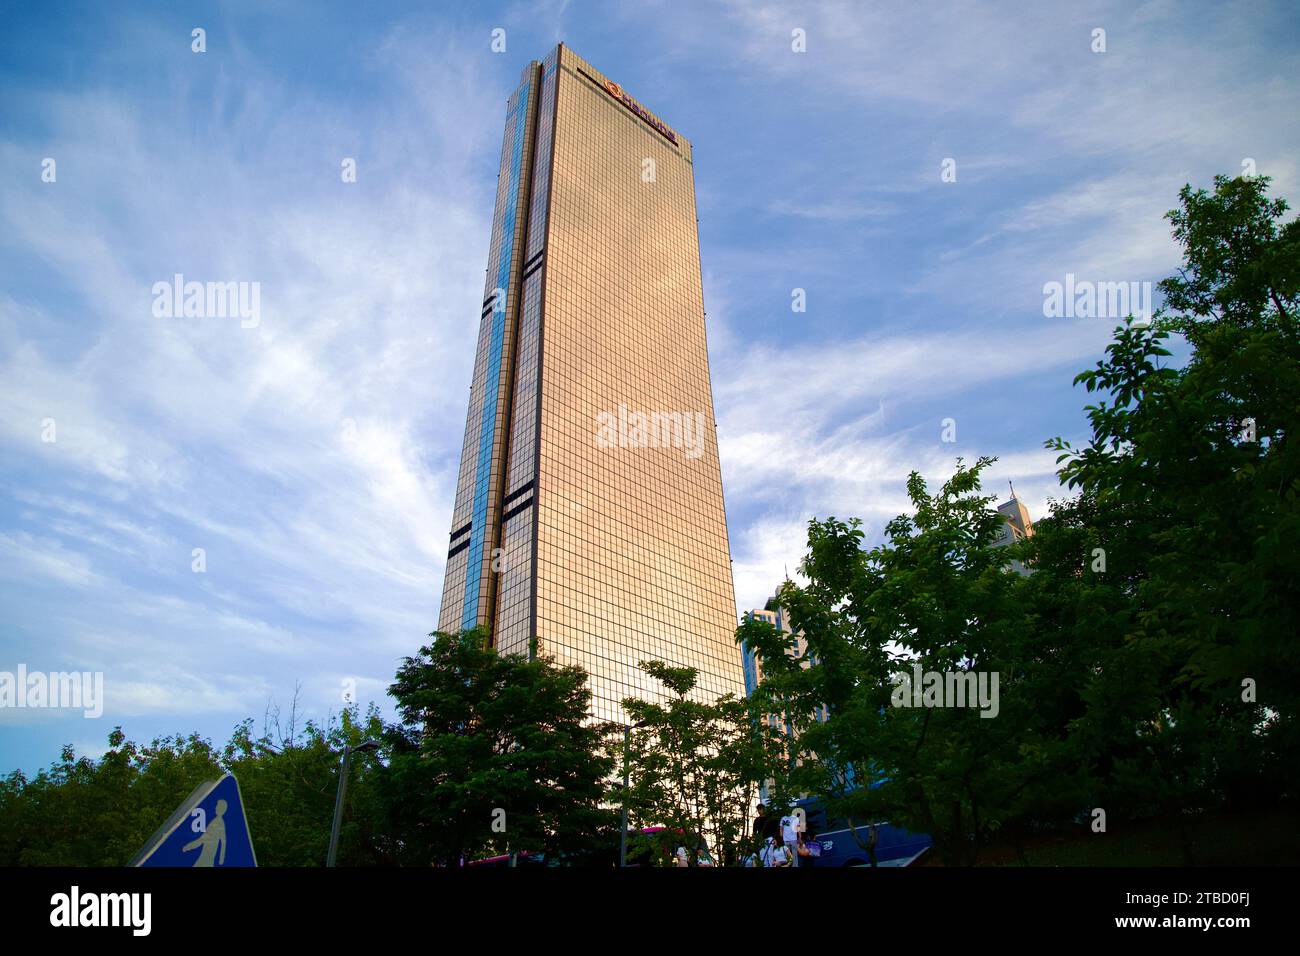 A picture of the 63 Building in Yeouido Hangang Park in Seoul, South Korea. Stock Photo